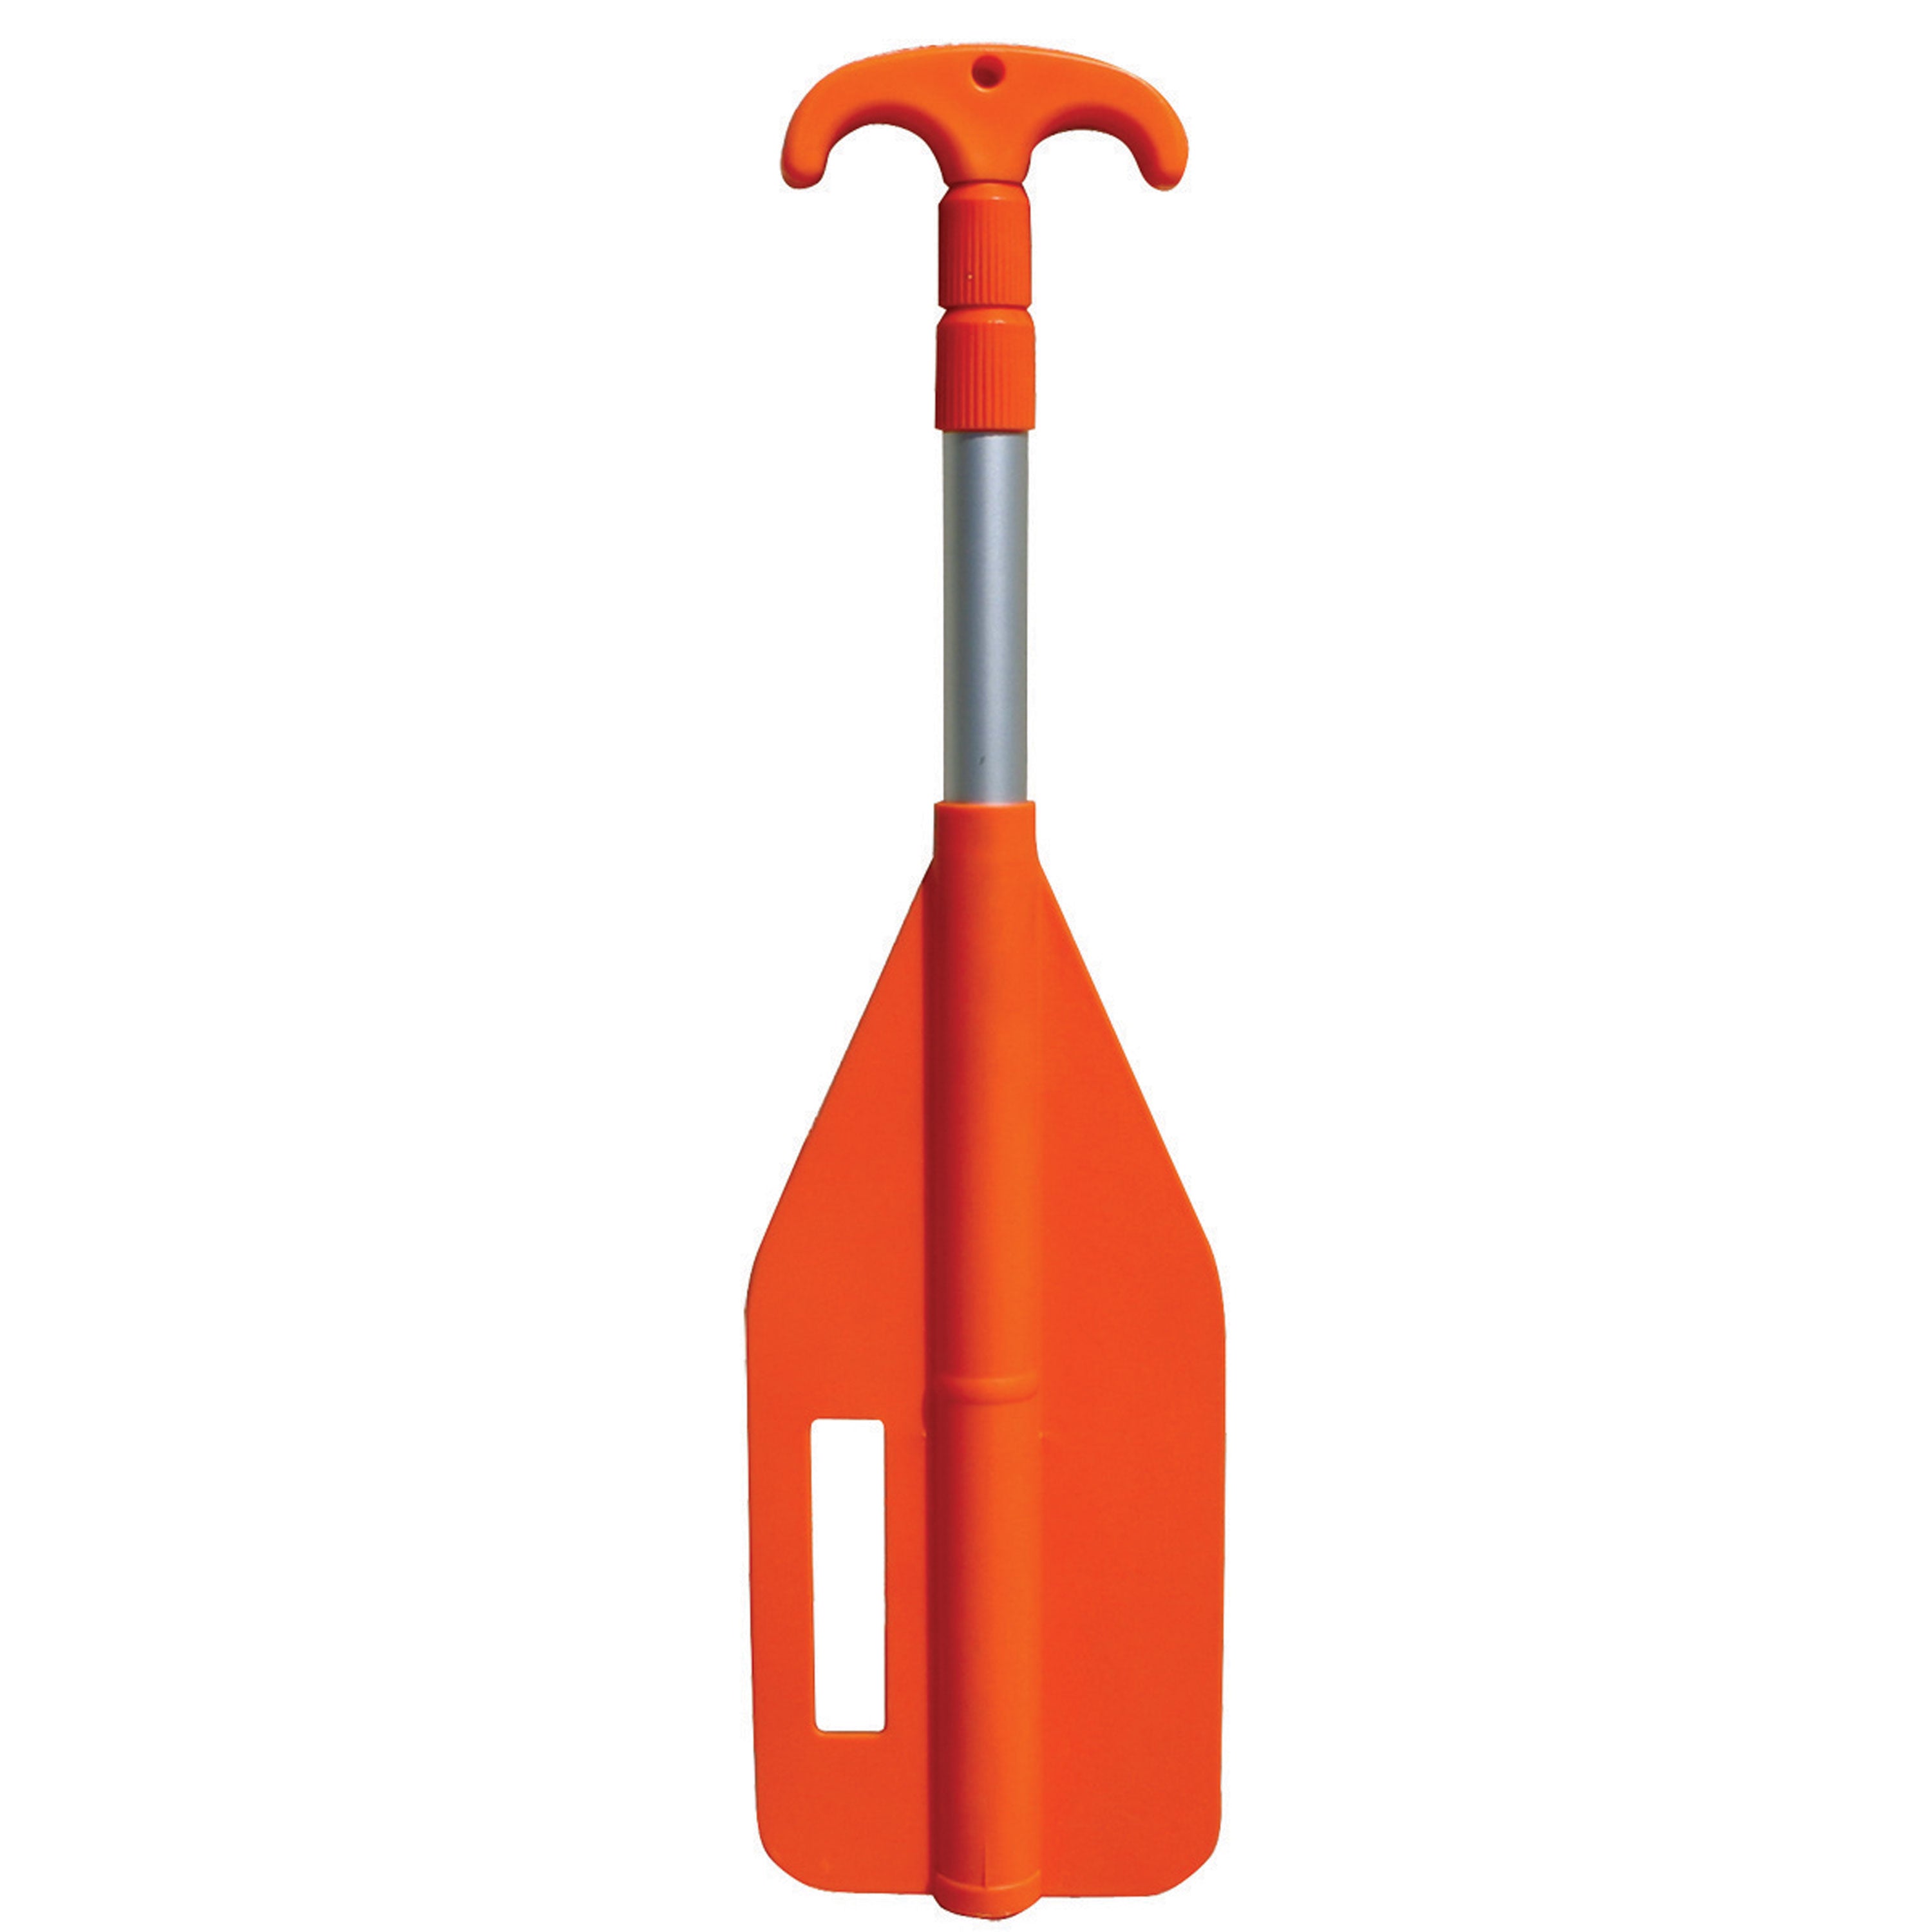 Airhead P-3 Telescoping Paddle - 25.5" to 72"